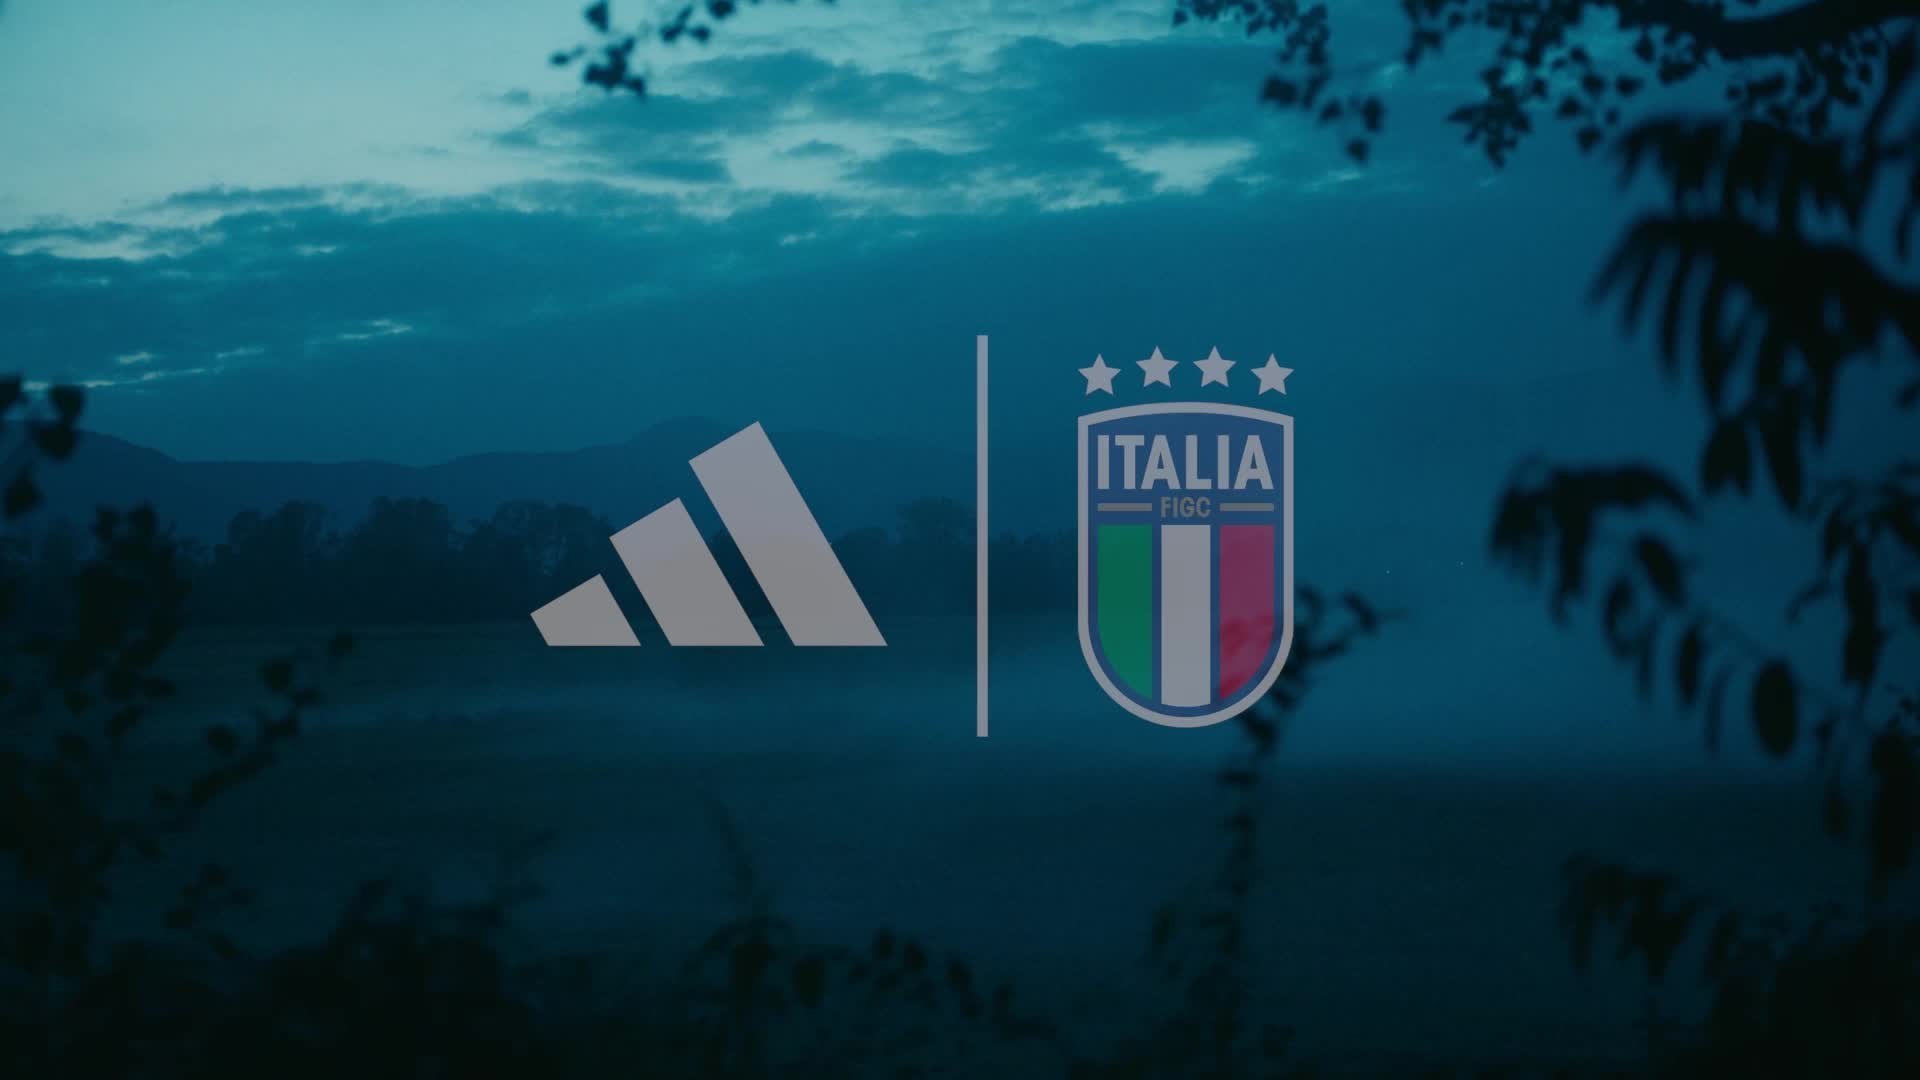 adidas and FIGC Present the New Football Kits of The Italian National Teams  And The Campaign “The Search – La Ricerca”